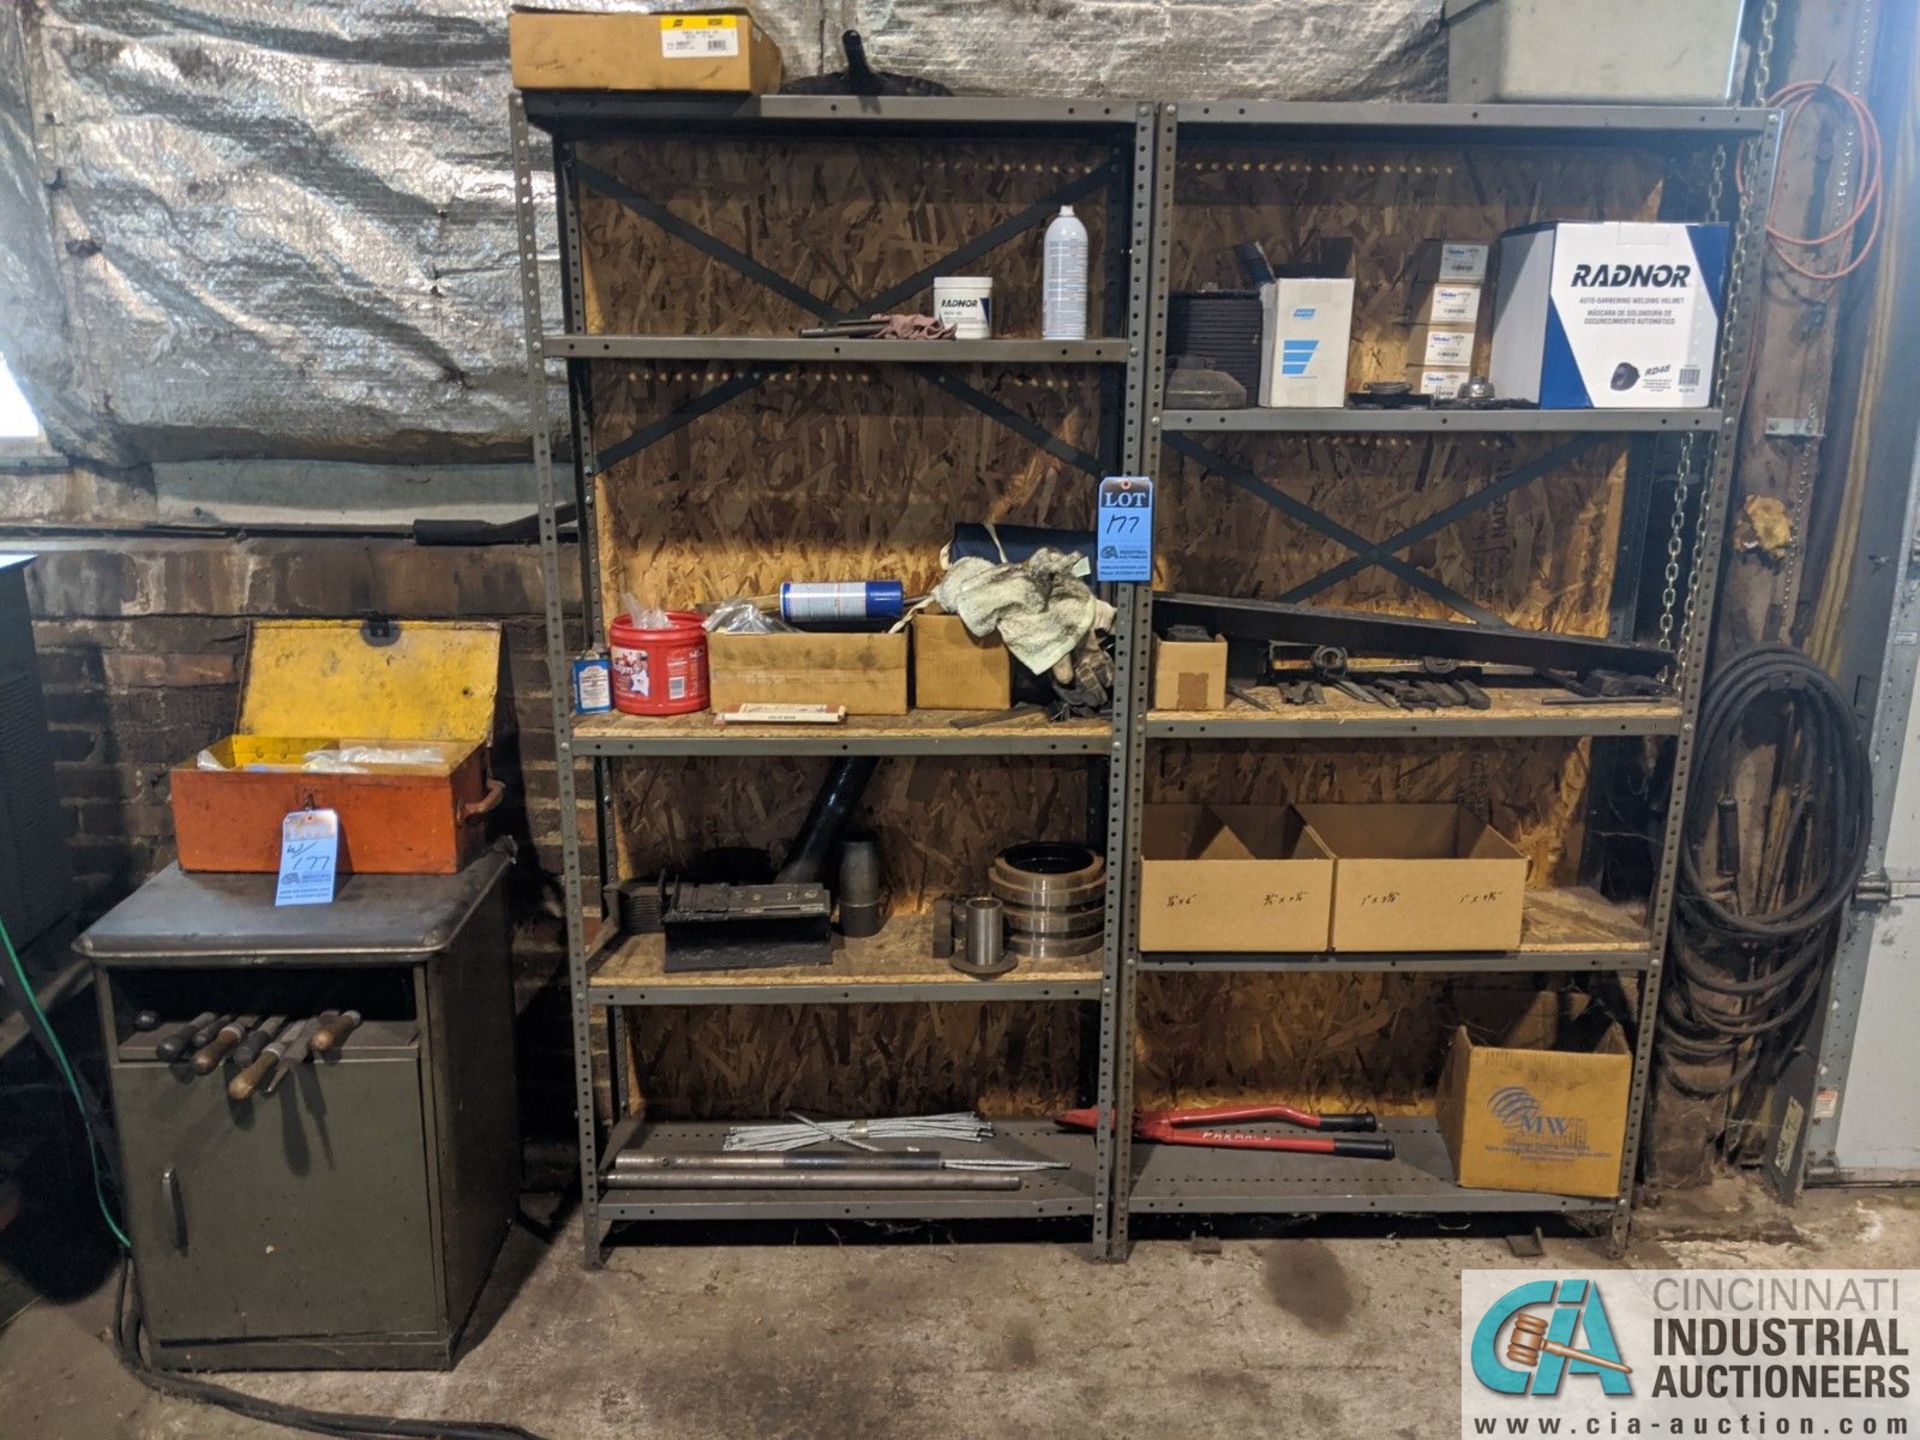 (LOT) STEEL SHELVING WITH PARTS AND ADJACENT CABINET WITH TOOLS